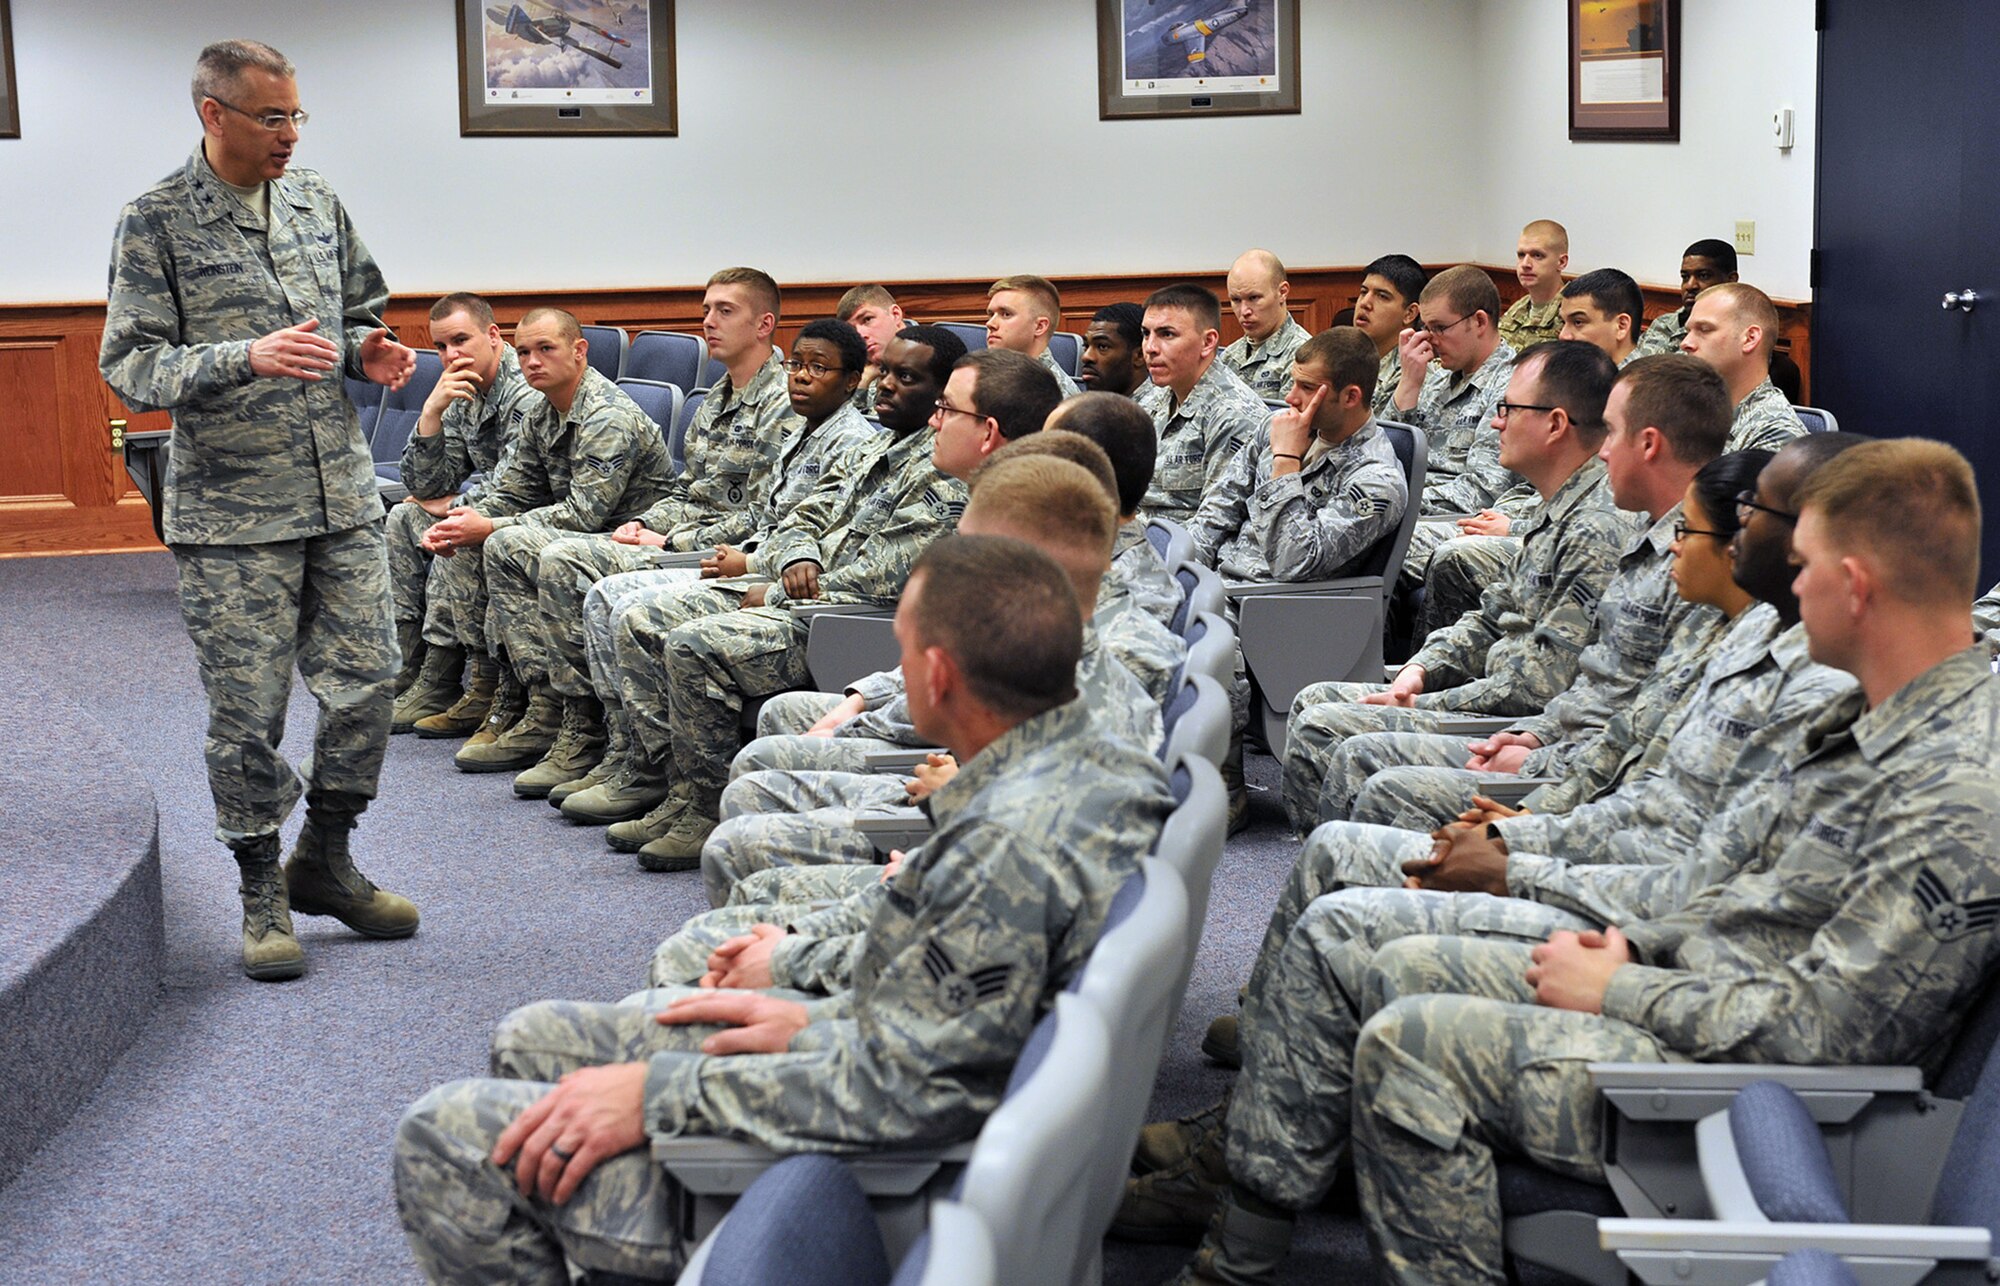 Maj. Gen. Jack Weinstein, 20th Air Force commander, addresses the students of Malmstrom Air Force Base’s Airman Leadership School Class 14-E April 1 about the importance of their future roles as supervisory staff sergeants.  The general also discussed some of the procedure changes and incentives proposed by the Force Improvement Program that are reinvigorating the Minuteman Intercontinental Ballistic Missile mission at Malmstrom, Minot and F.E. Warren AFBs. (U.S. Air Force photo / John Turner)